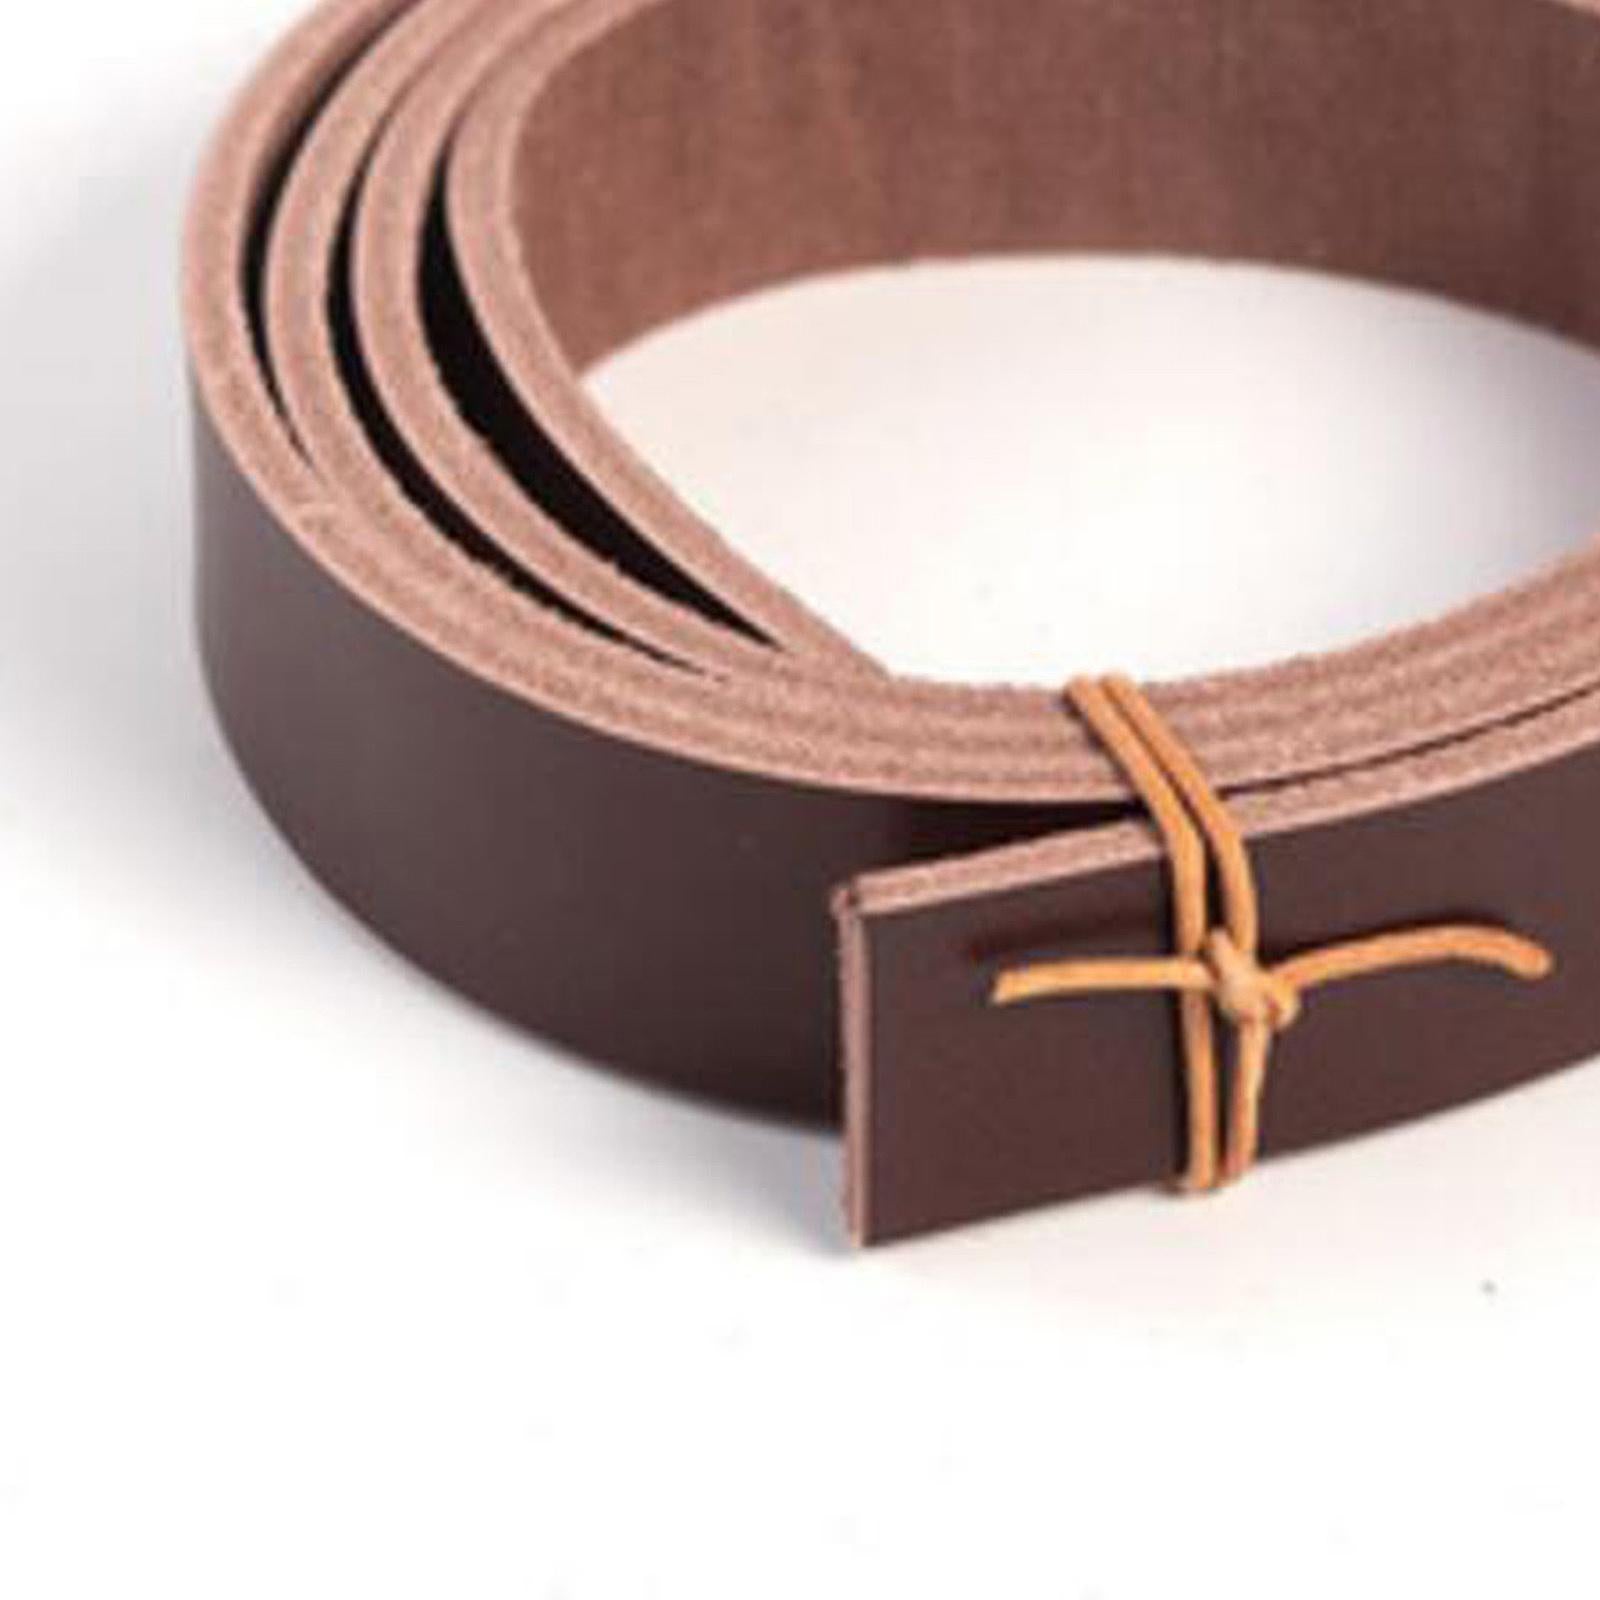 PU Leather Strips Pets Collars 2x80cm Straps Crafting Sewing Keychain Belt Brown